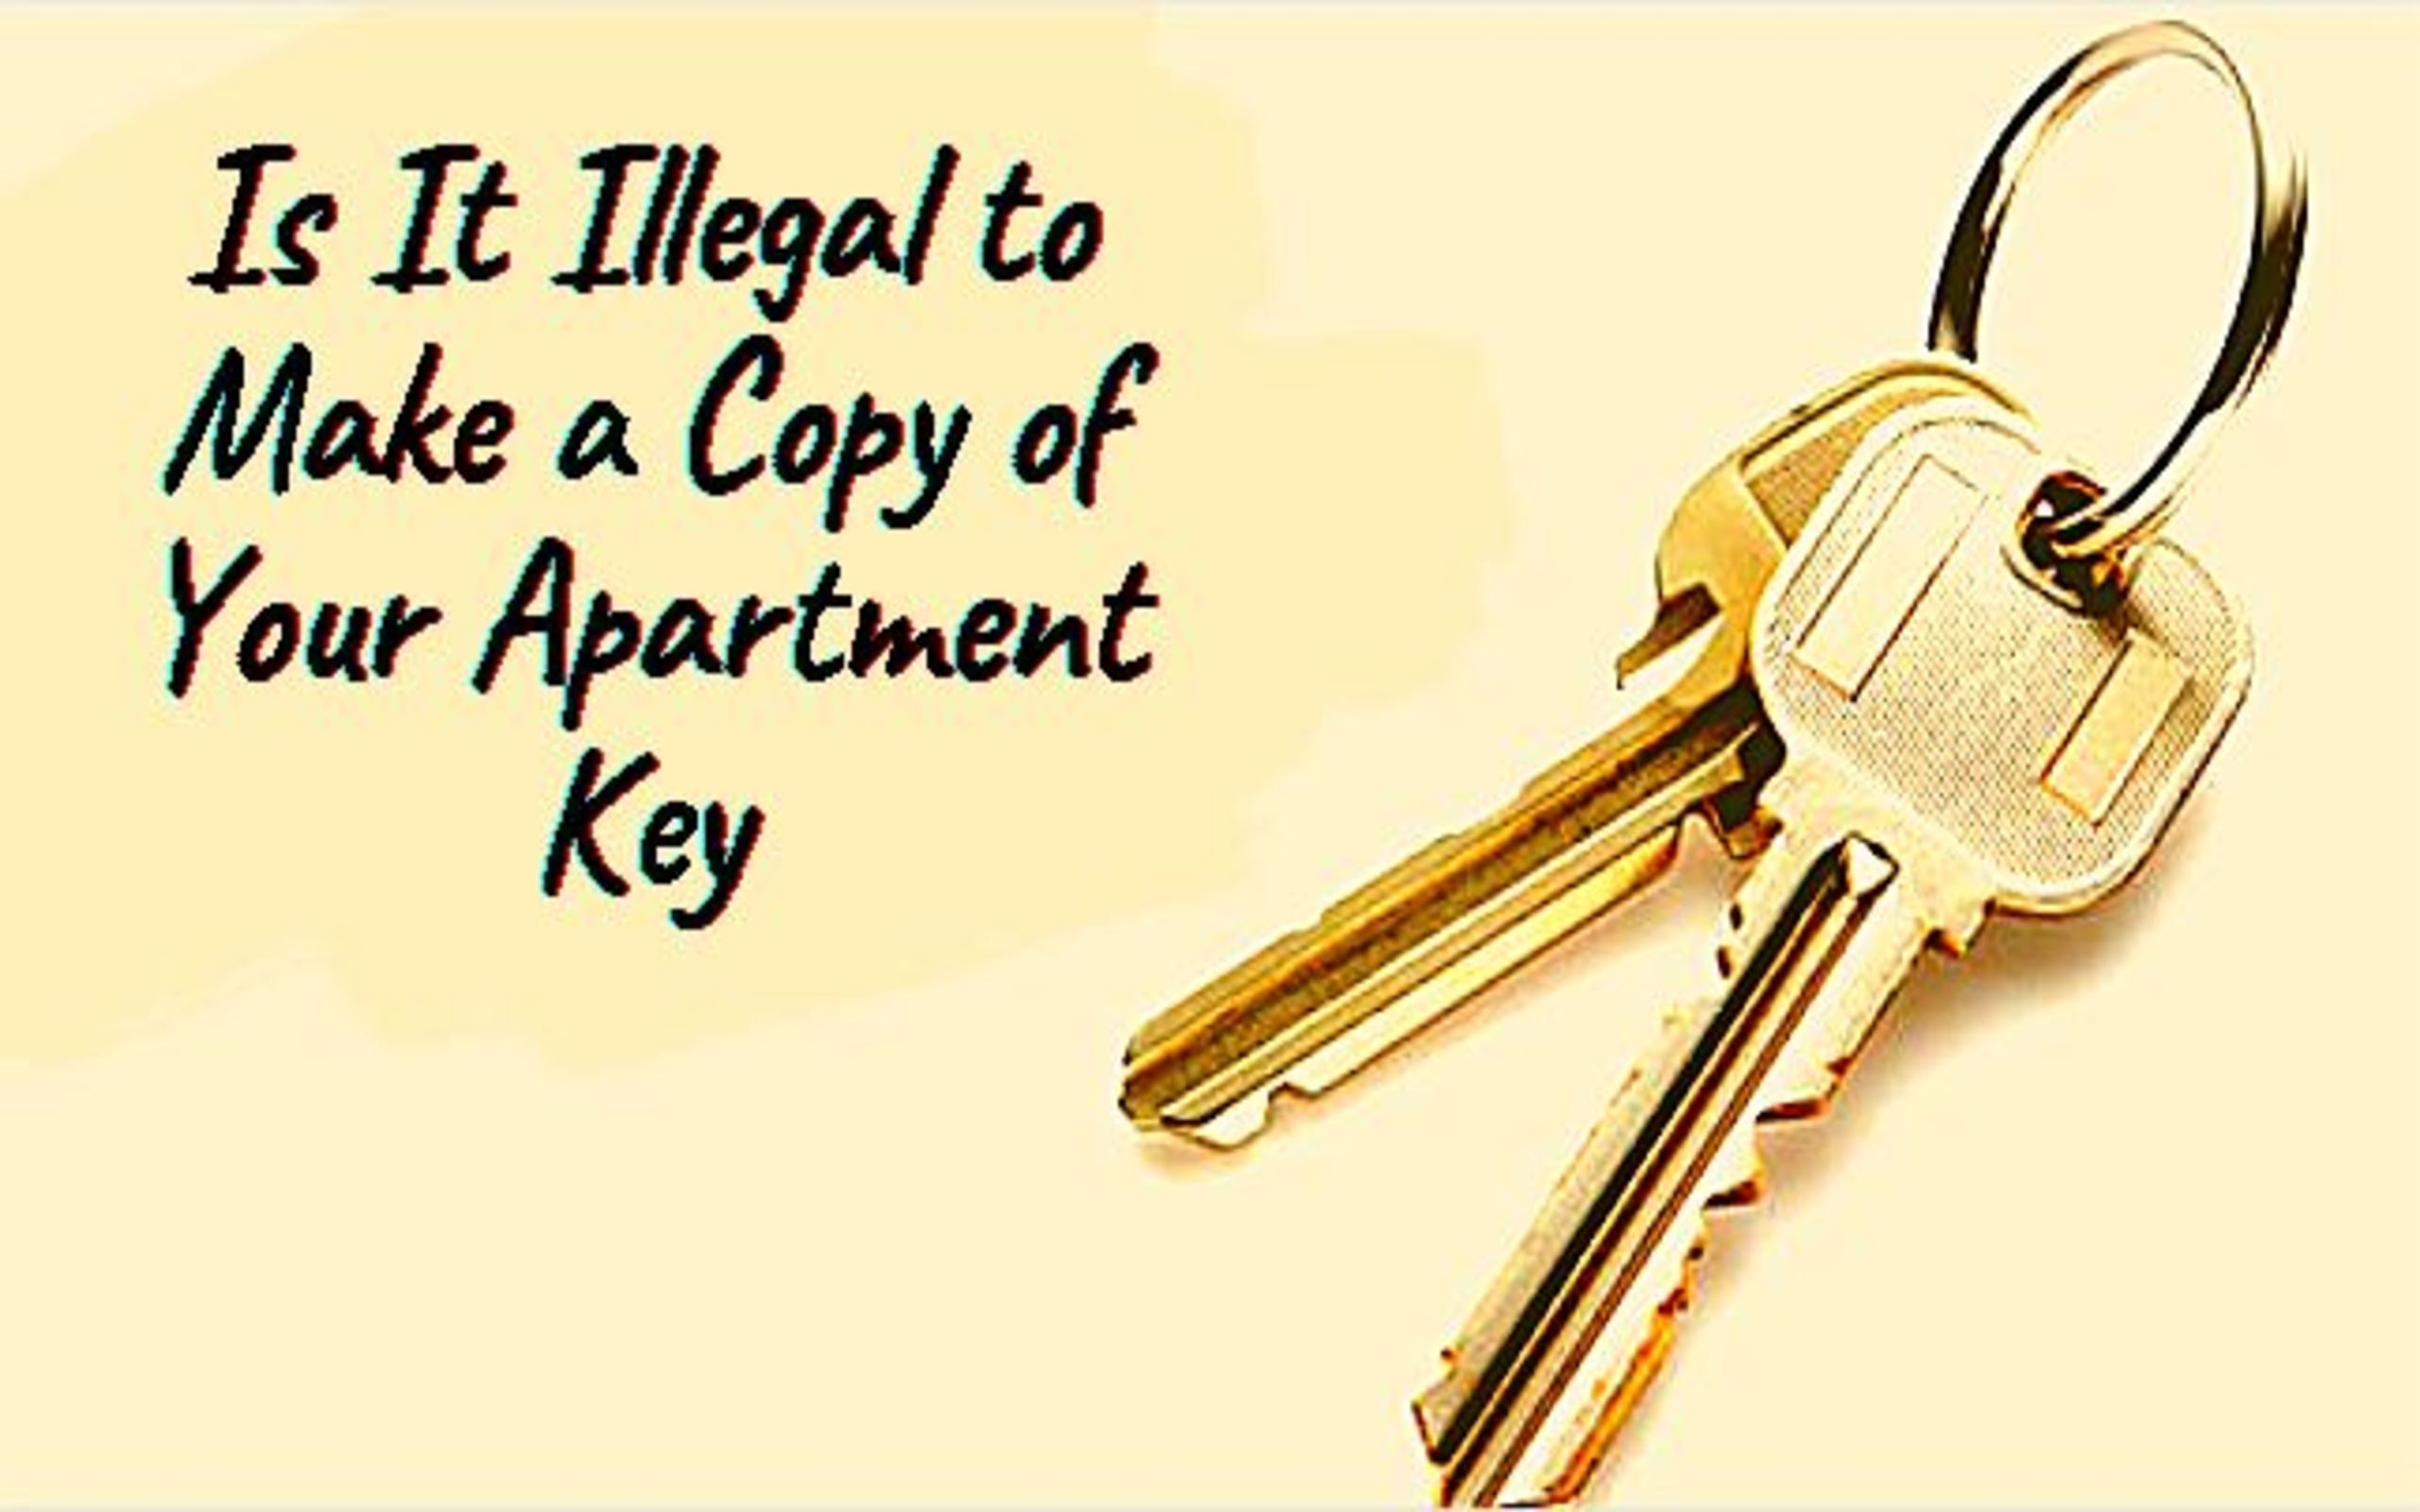 Mark Roemer image of a set of keys and the words is it illegal to make a copy of your apartment key